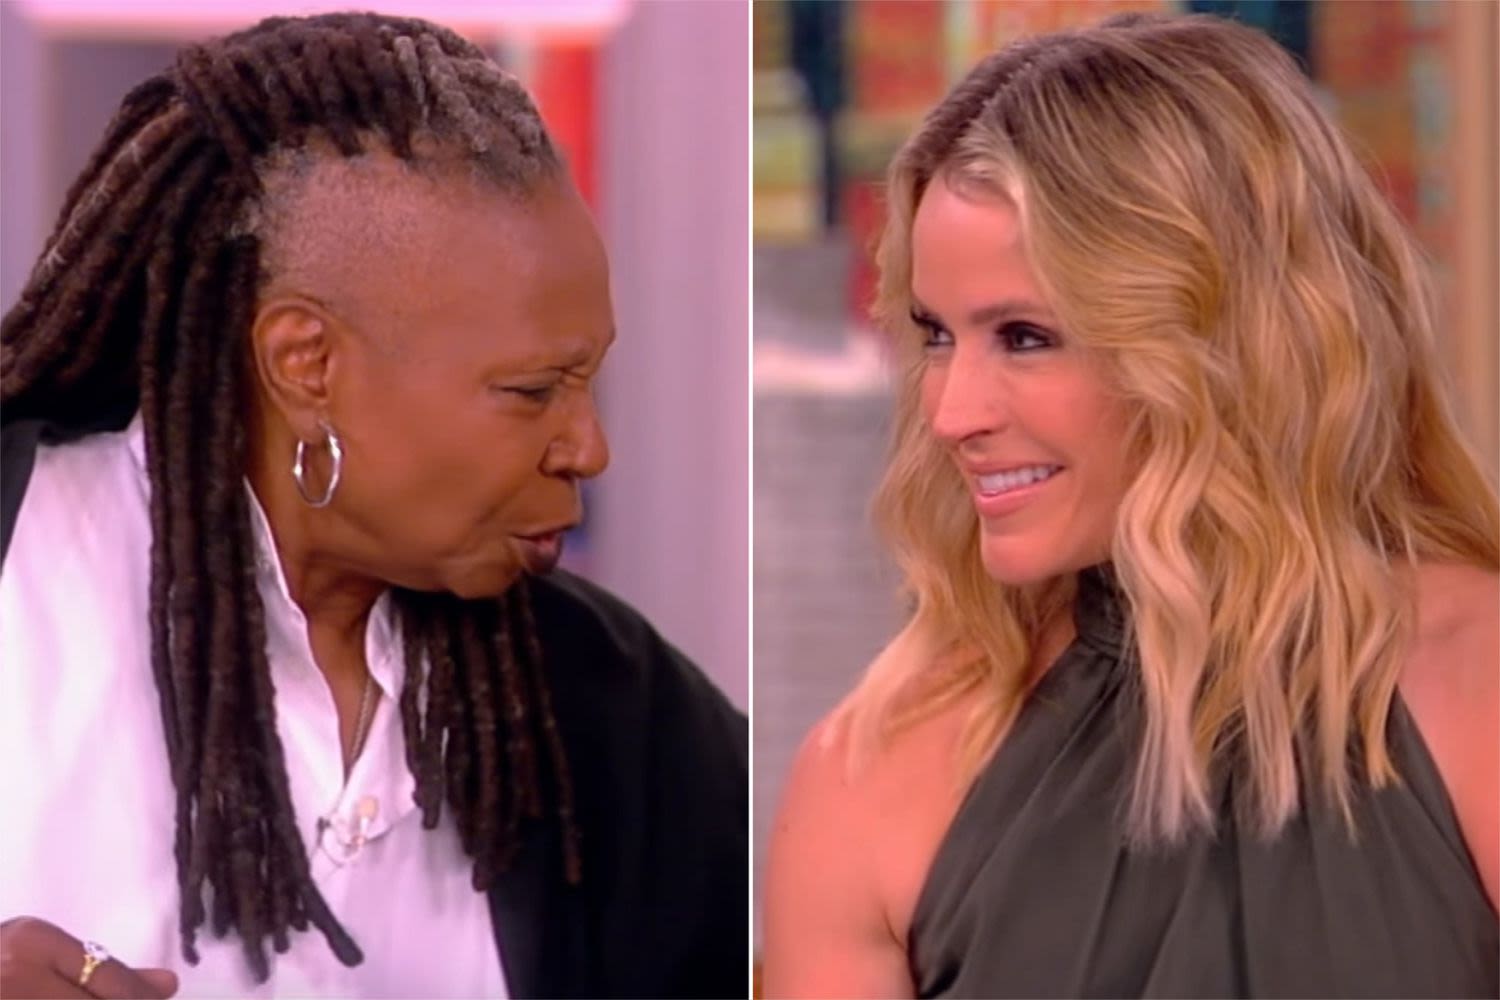 Whoopi Goldberg stops 'The View' discussion to call Sara Haines skinny